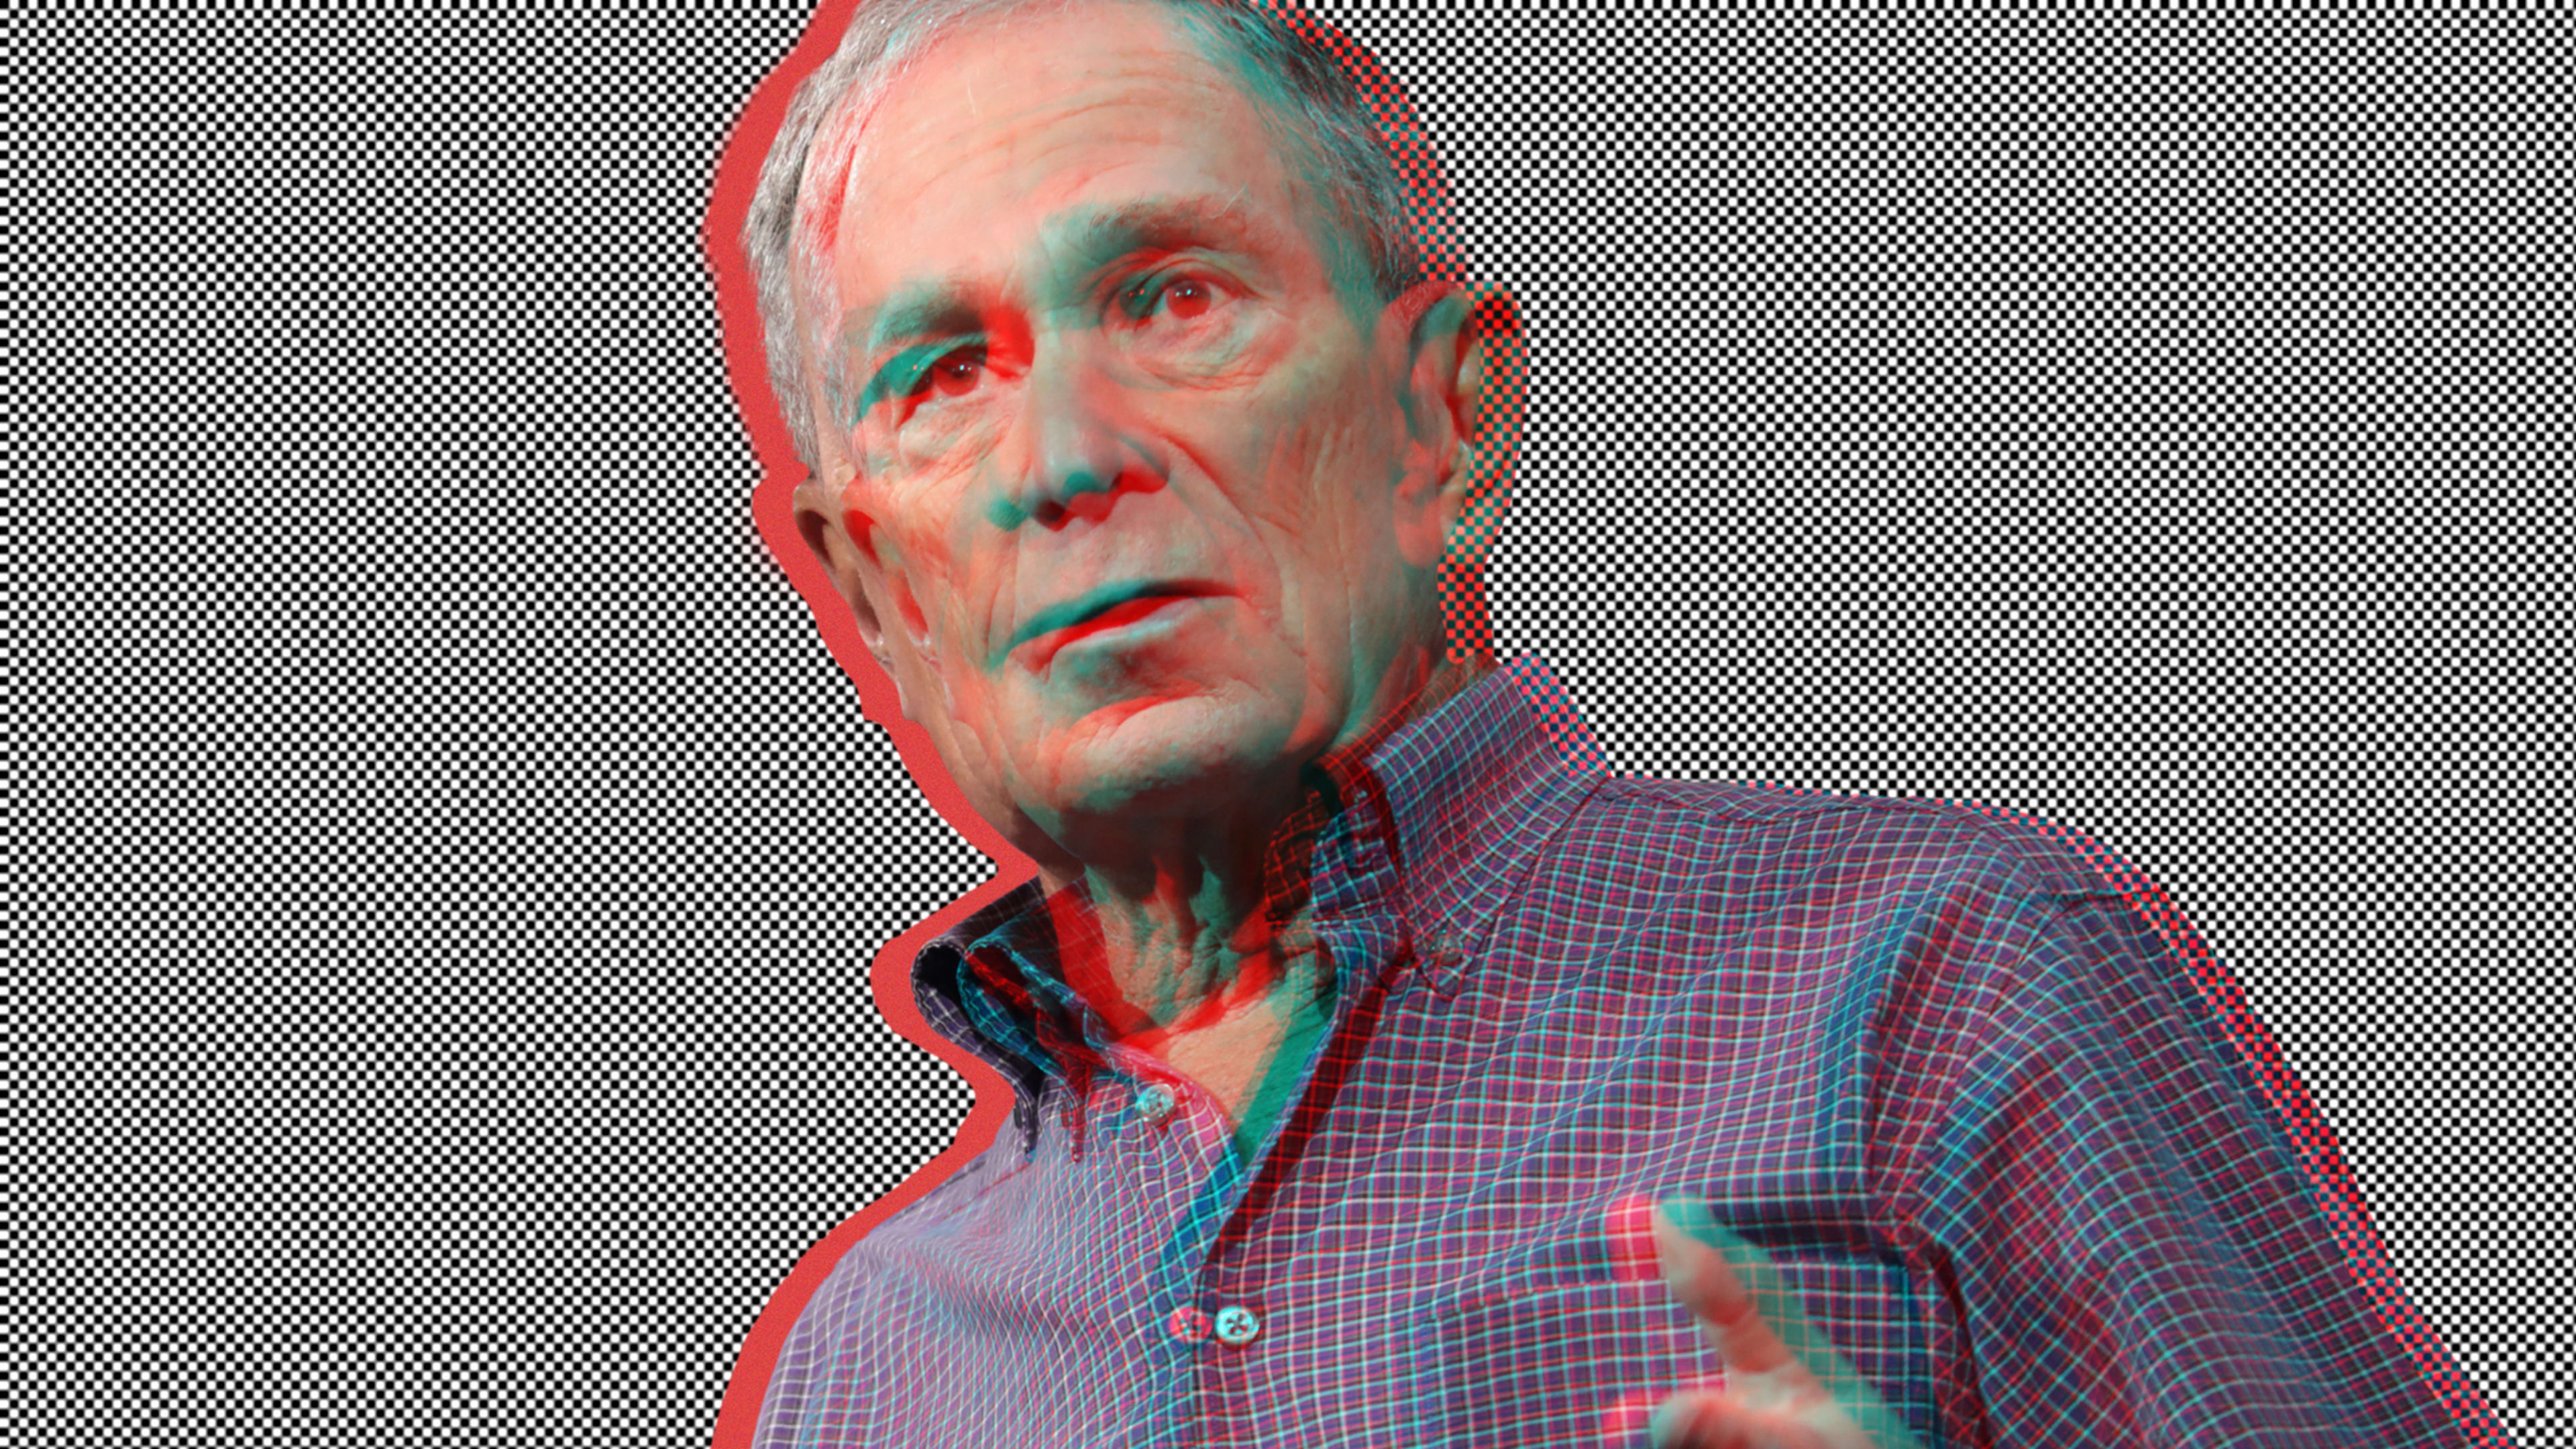 Michael Bloomberg wanted ironic internet cred, but he won’t like these anti-Bloomberg memes